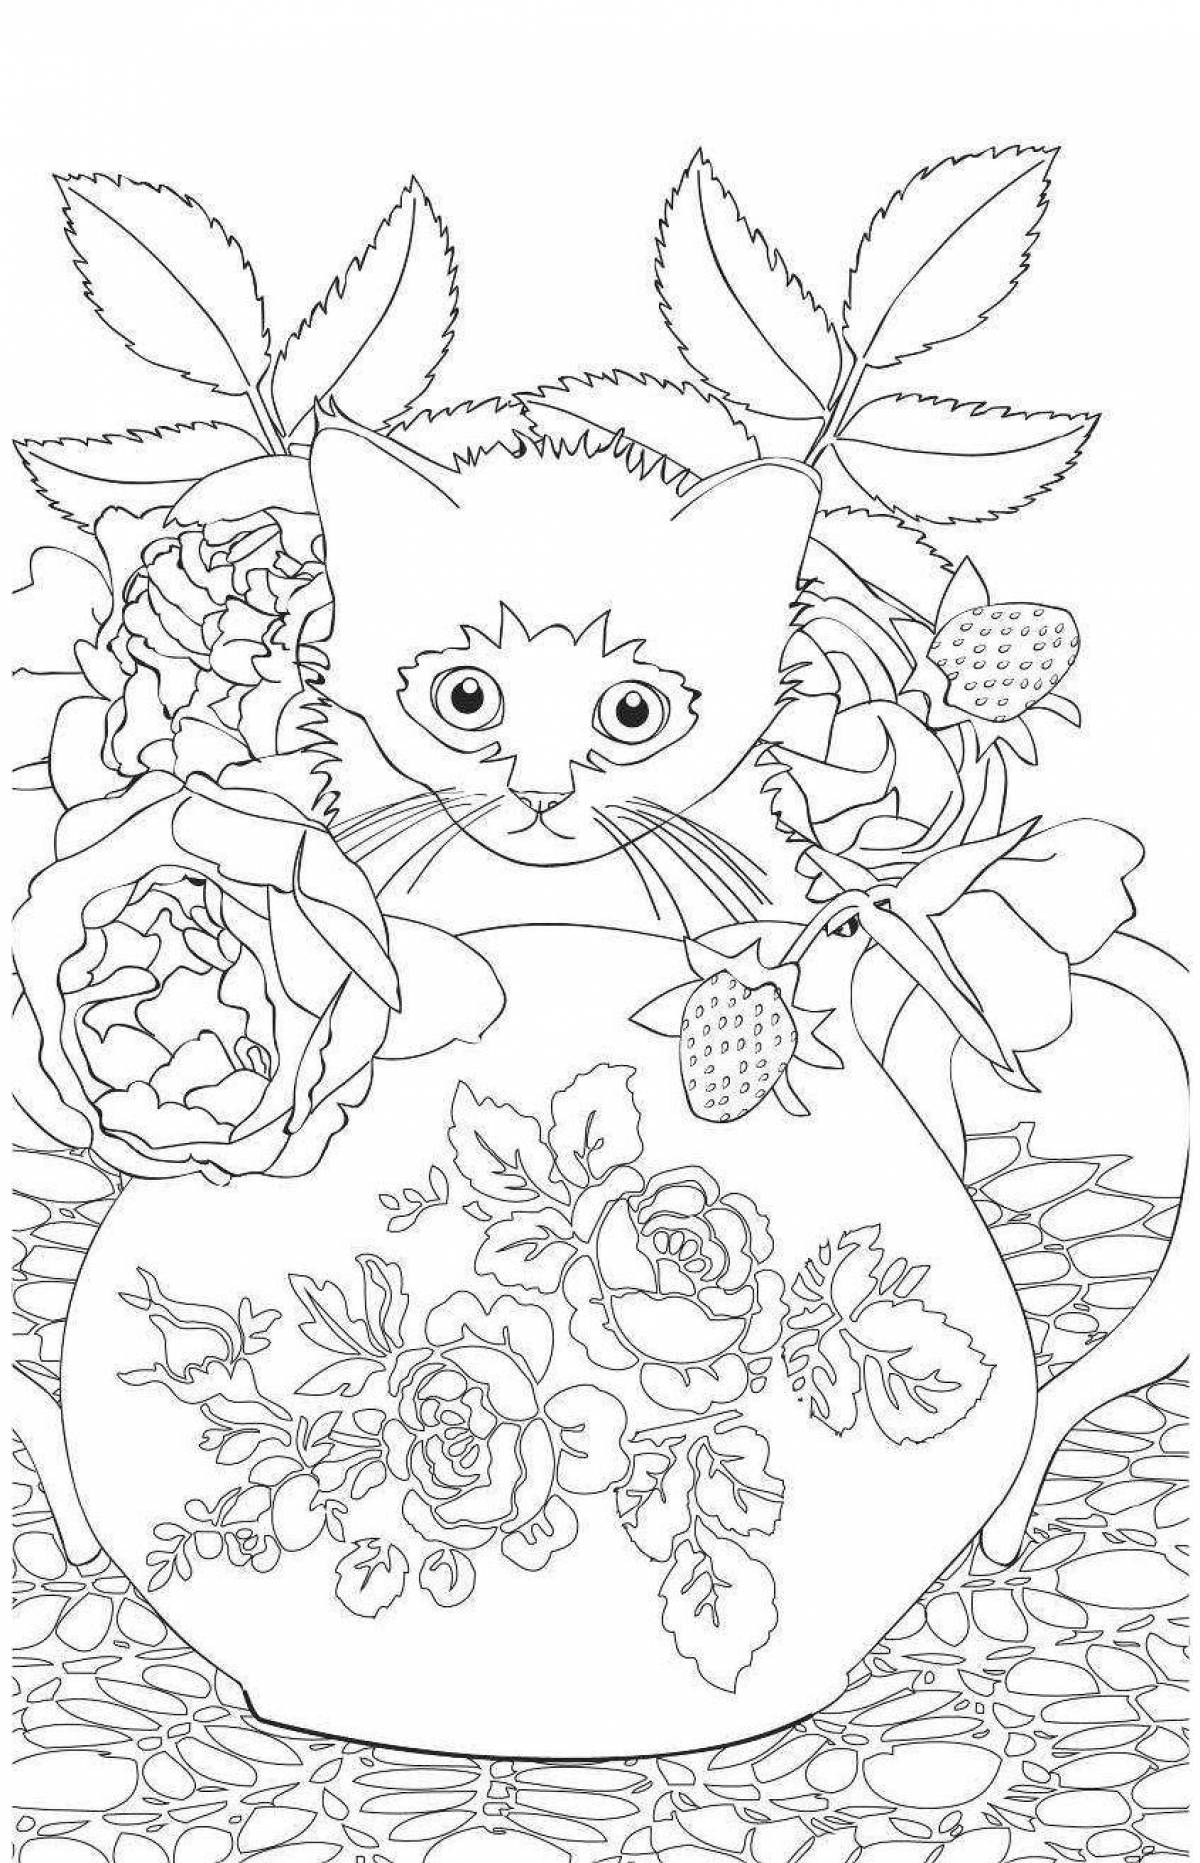 Glowing cat therapy antistress coloring page